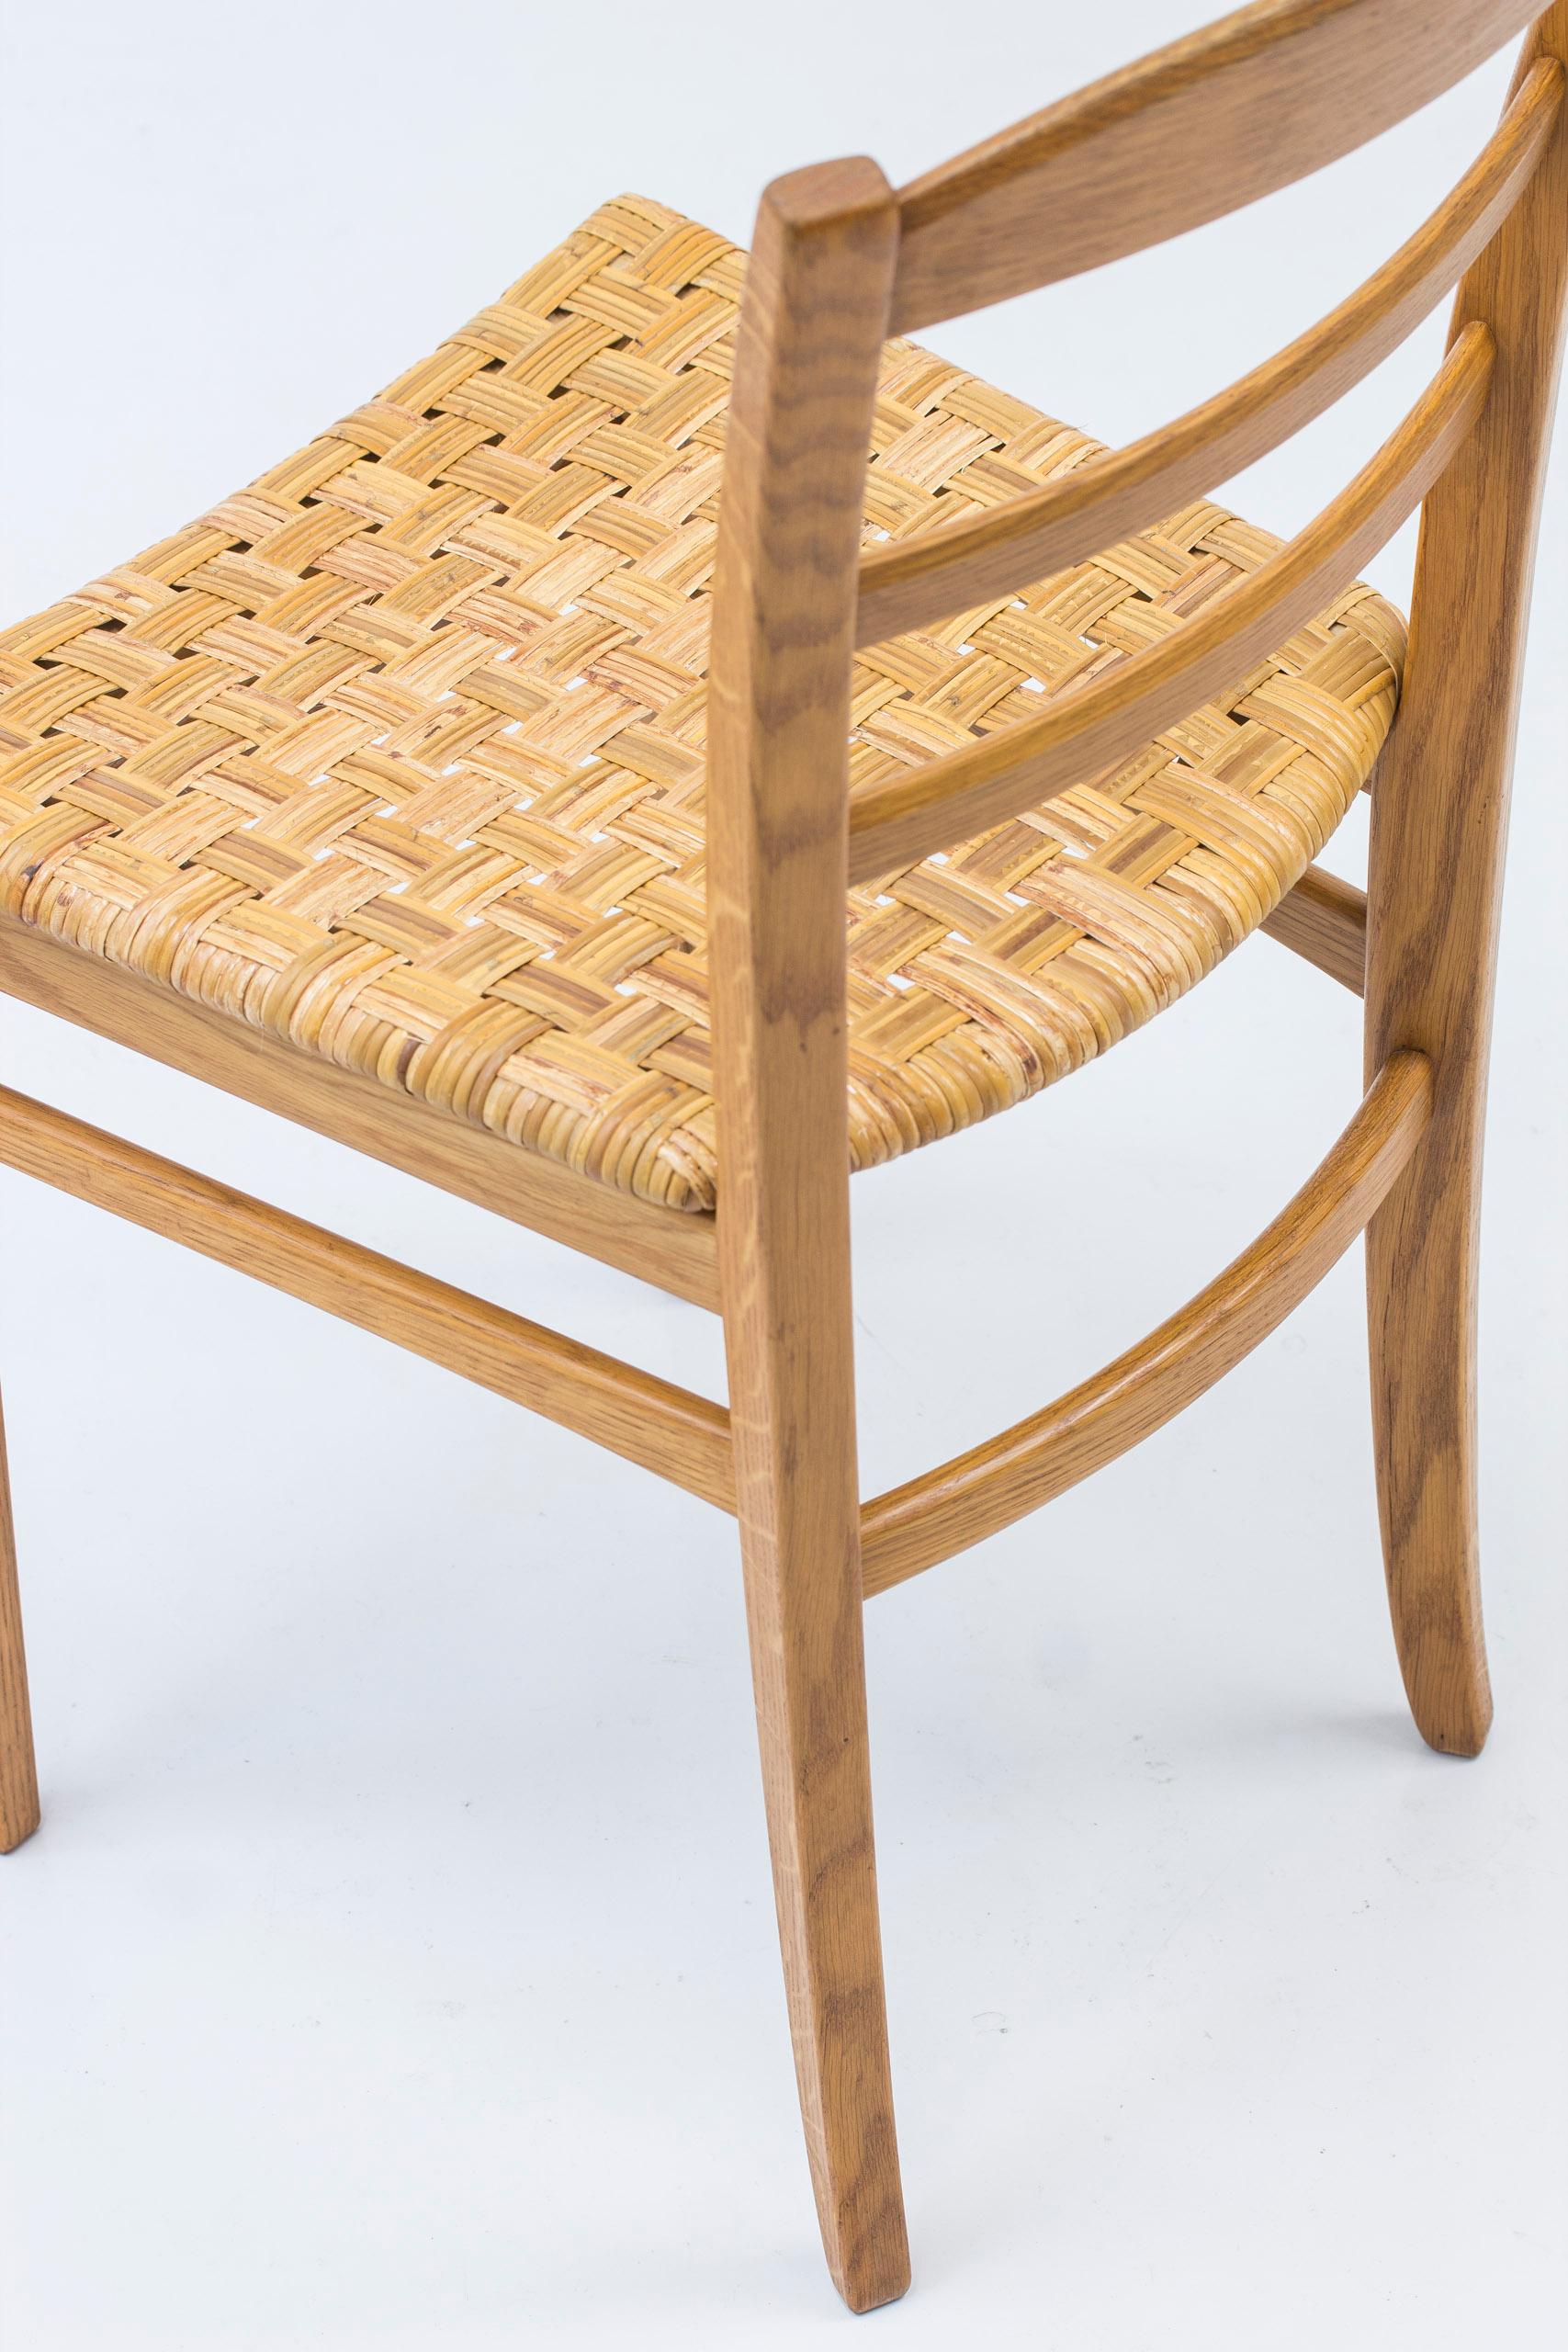 Oak and Cane Weave Dining Chairs by Carl Malmsten, Swedish Modern, 1950s For Sale 3